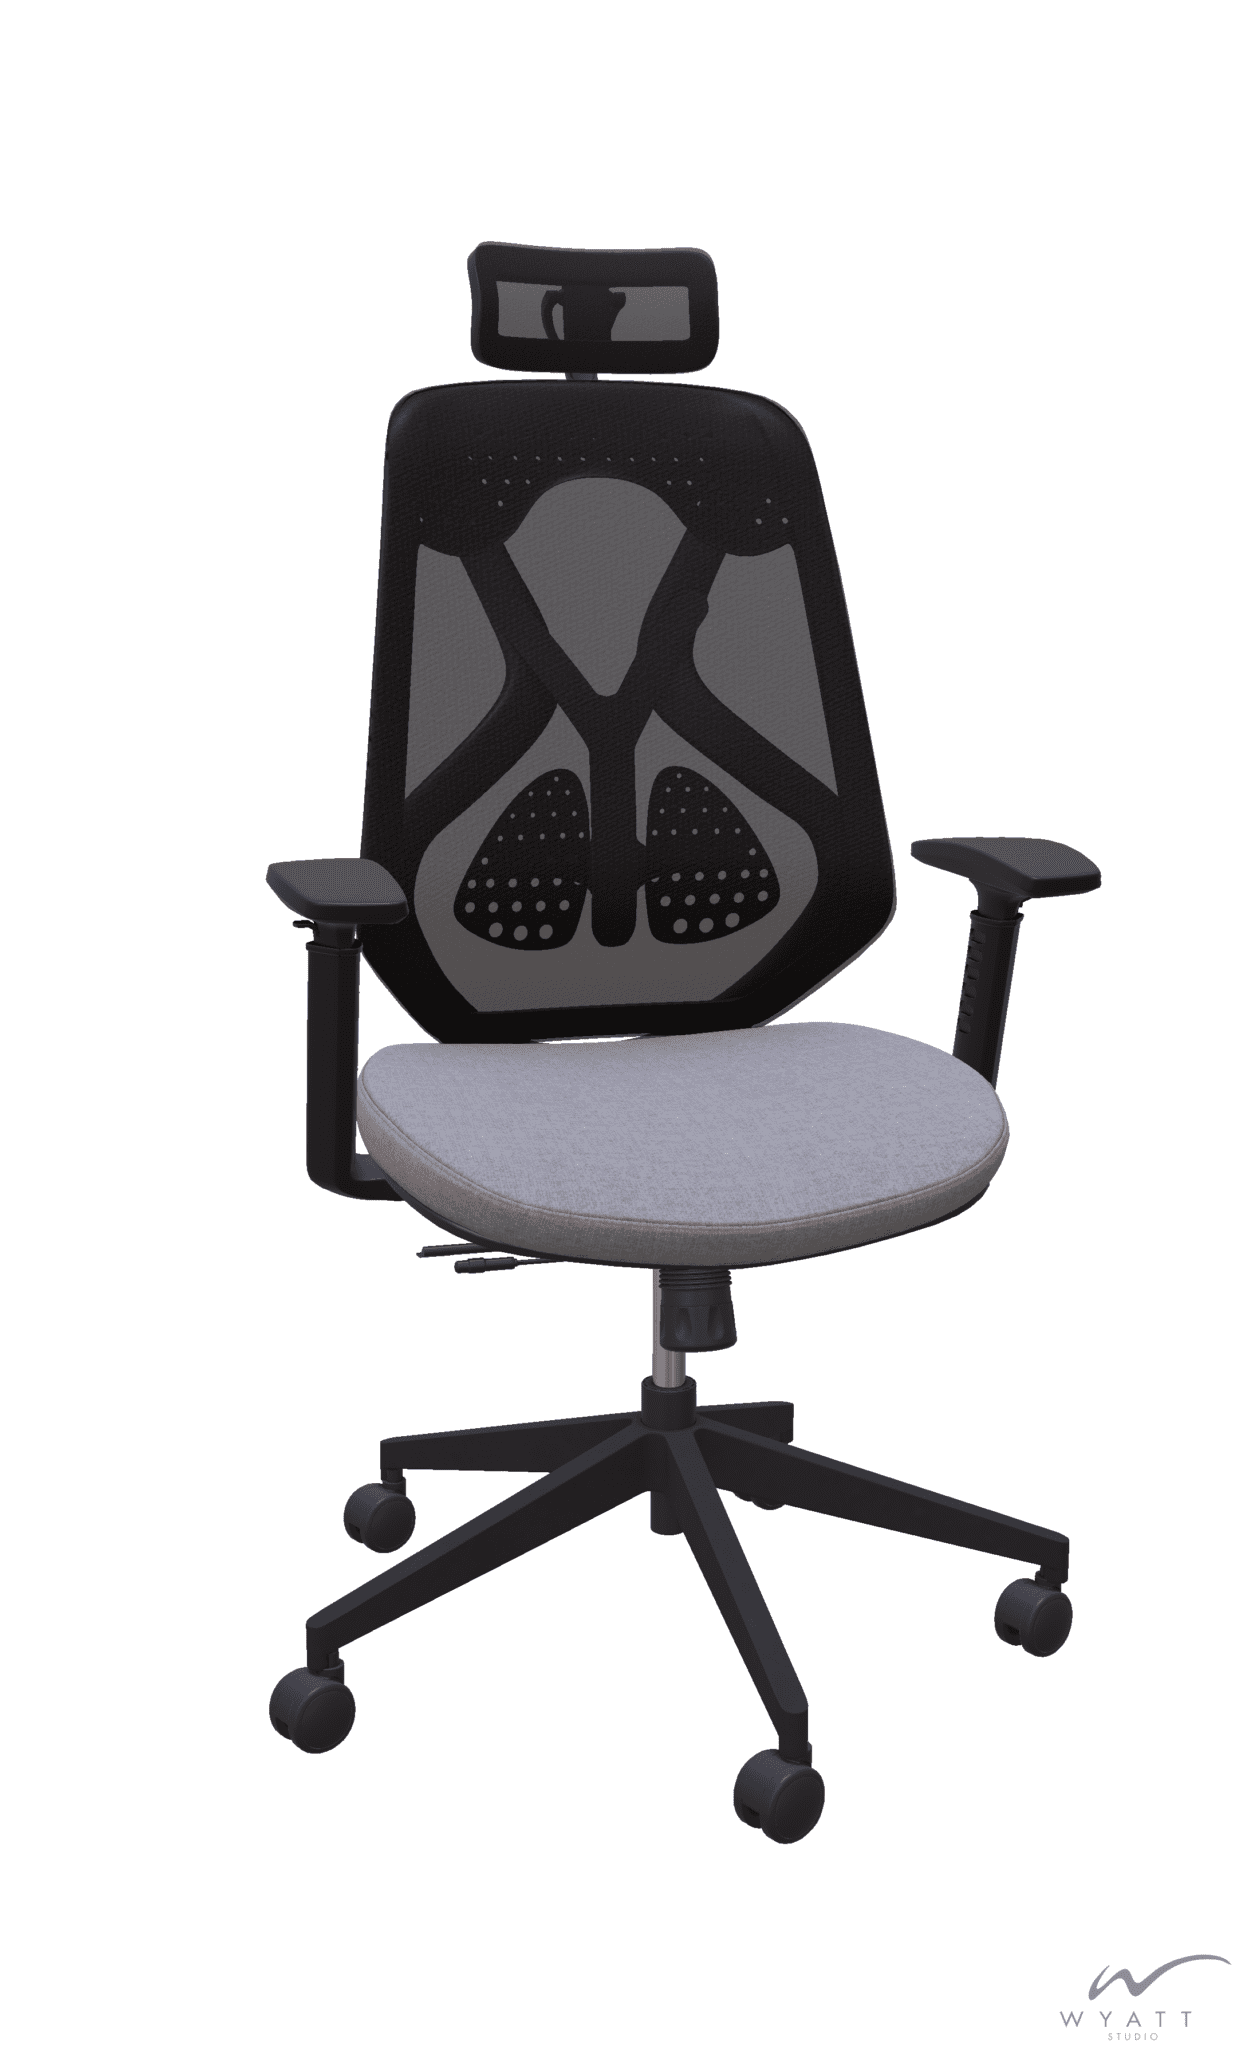 New Wyatt Roswell Desk Chair with Headrest - Office Furniture Resources